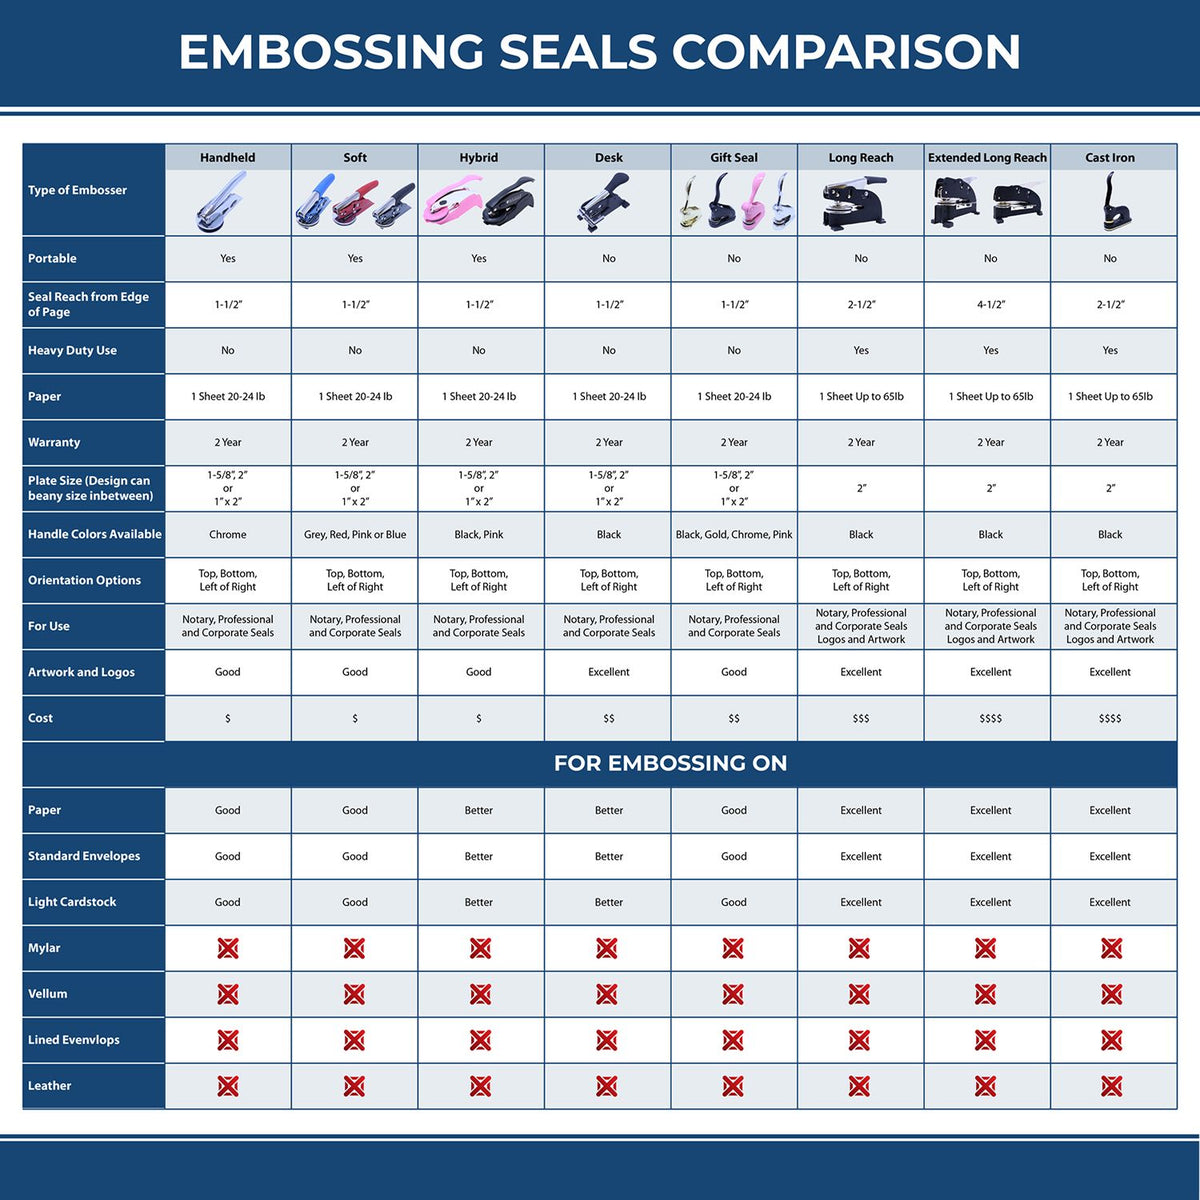 A comparison chart for the different types of mount models available for the Long Reach Delaware Geology Seal